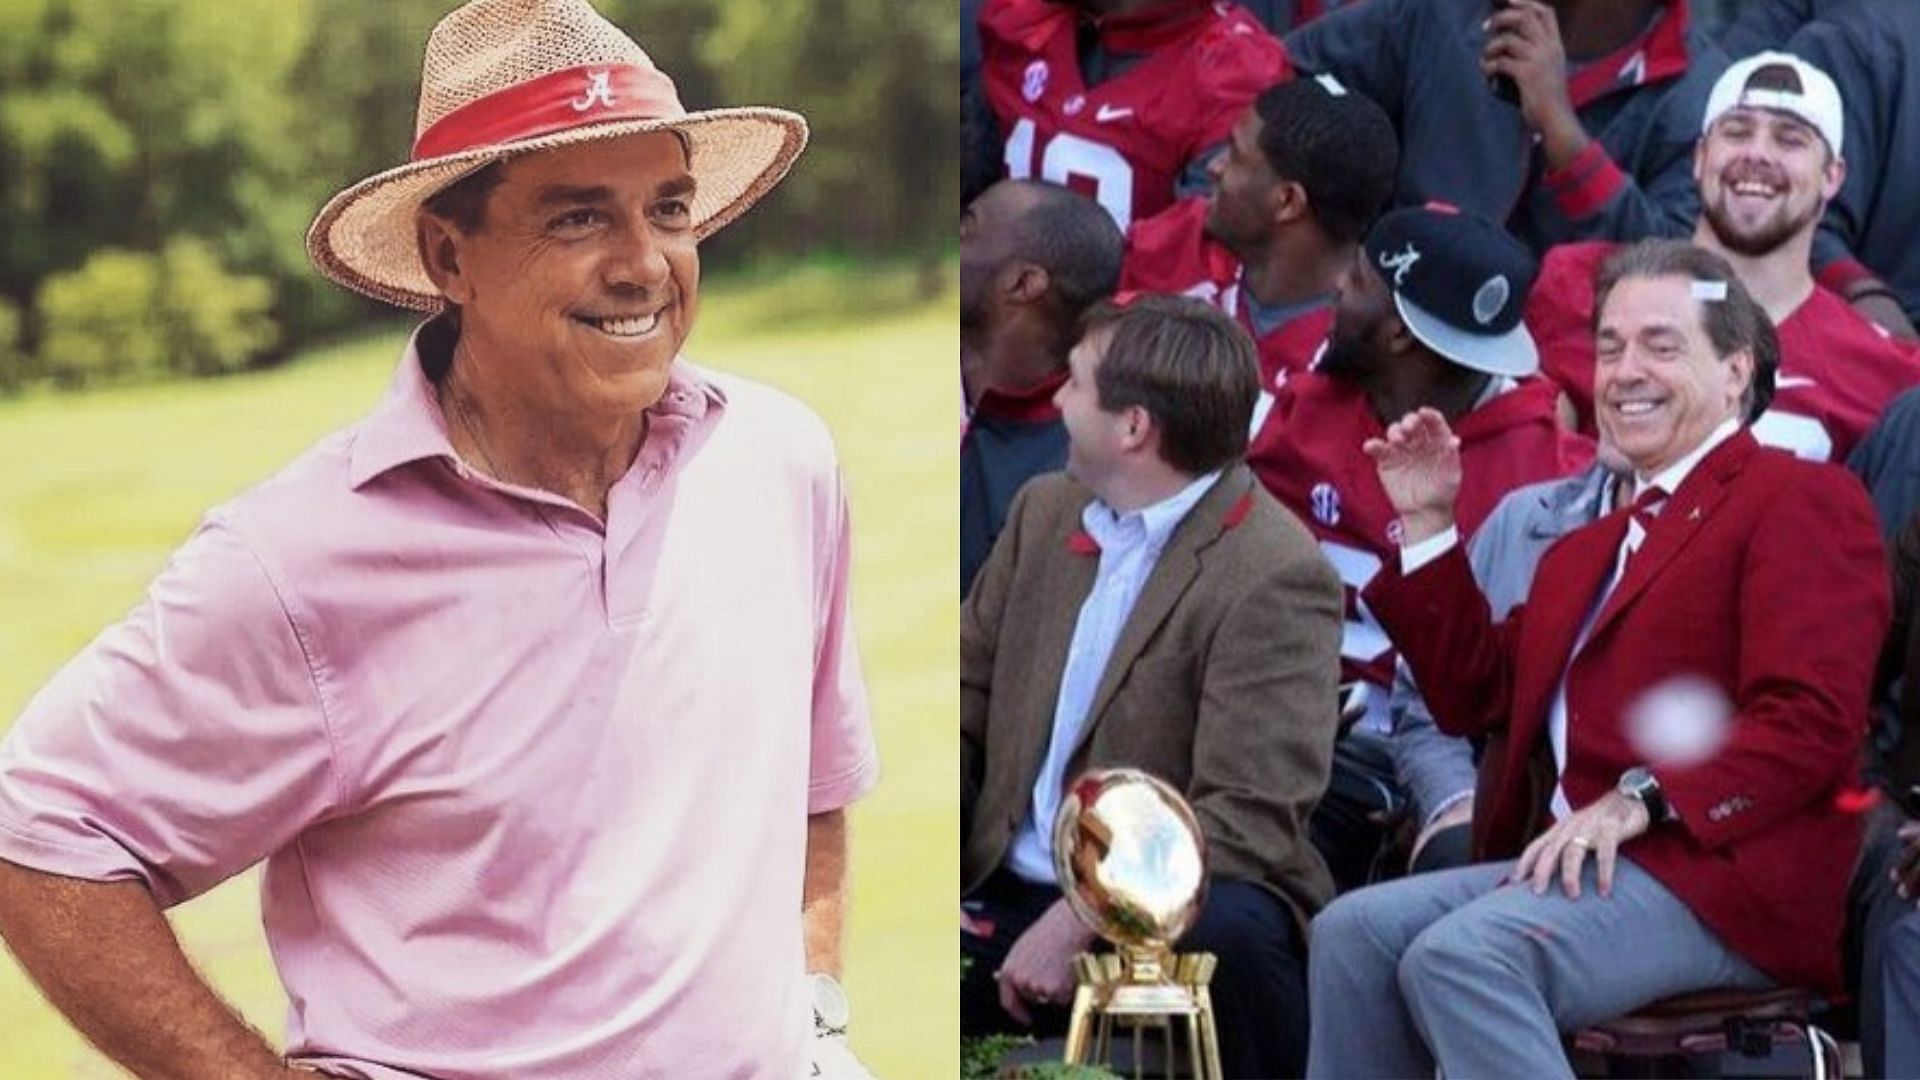 The straw hat has been a tradition of Nick Saban